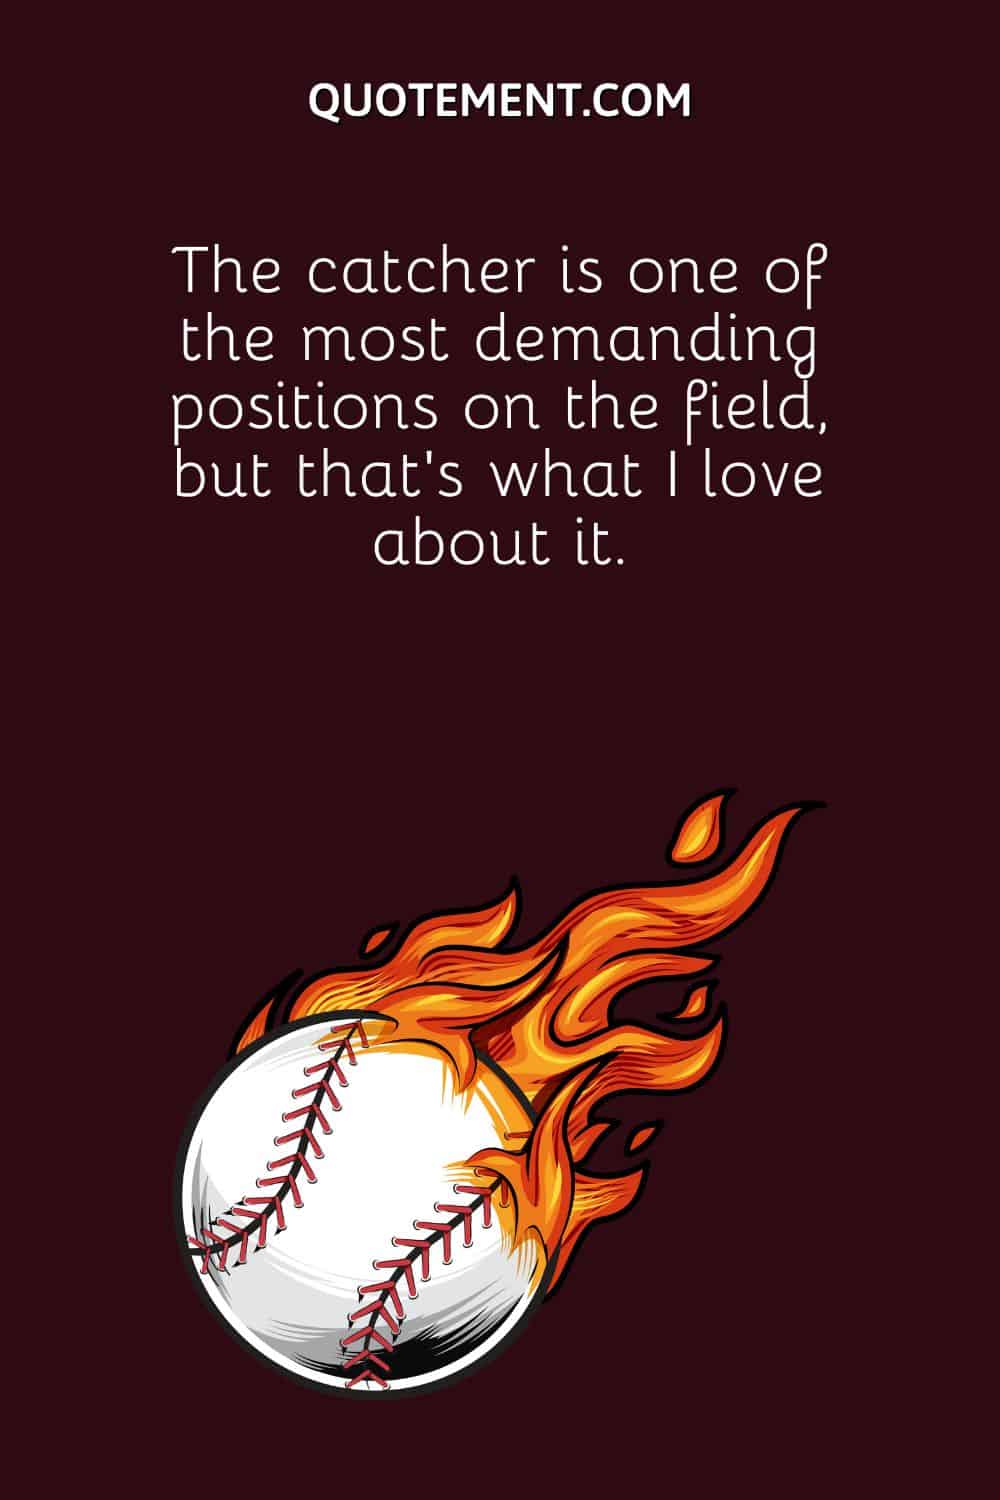 The catcher is one of the most demanding positions on the field, but that’s what I love about it.